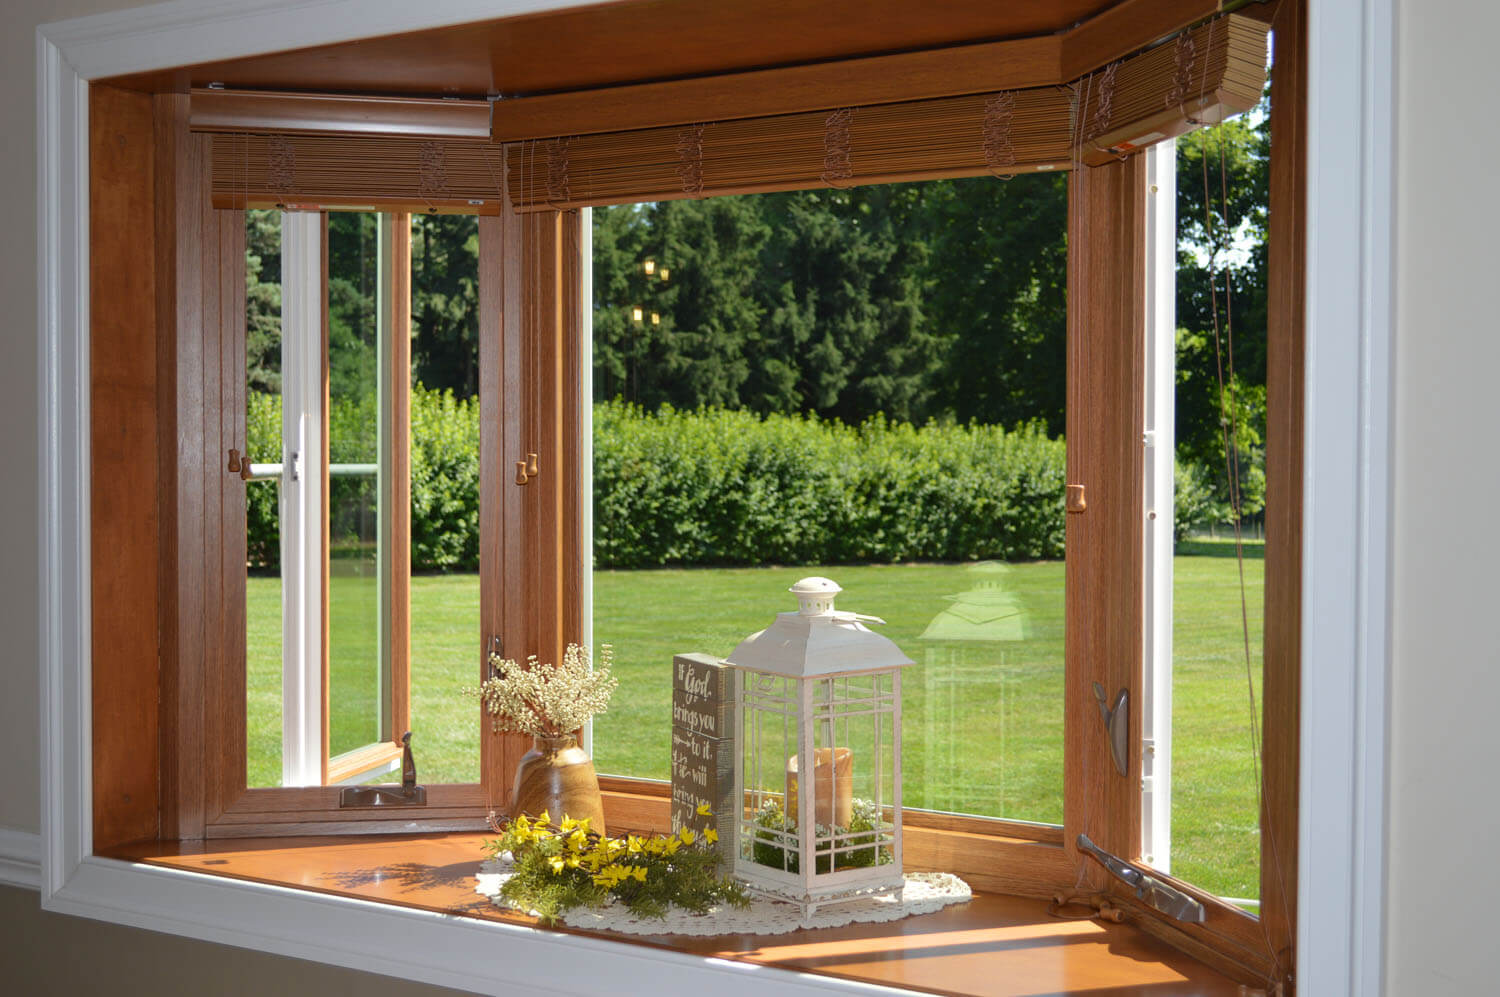 Interior view of a SoftLite bay window with wood trim